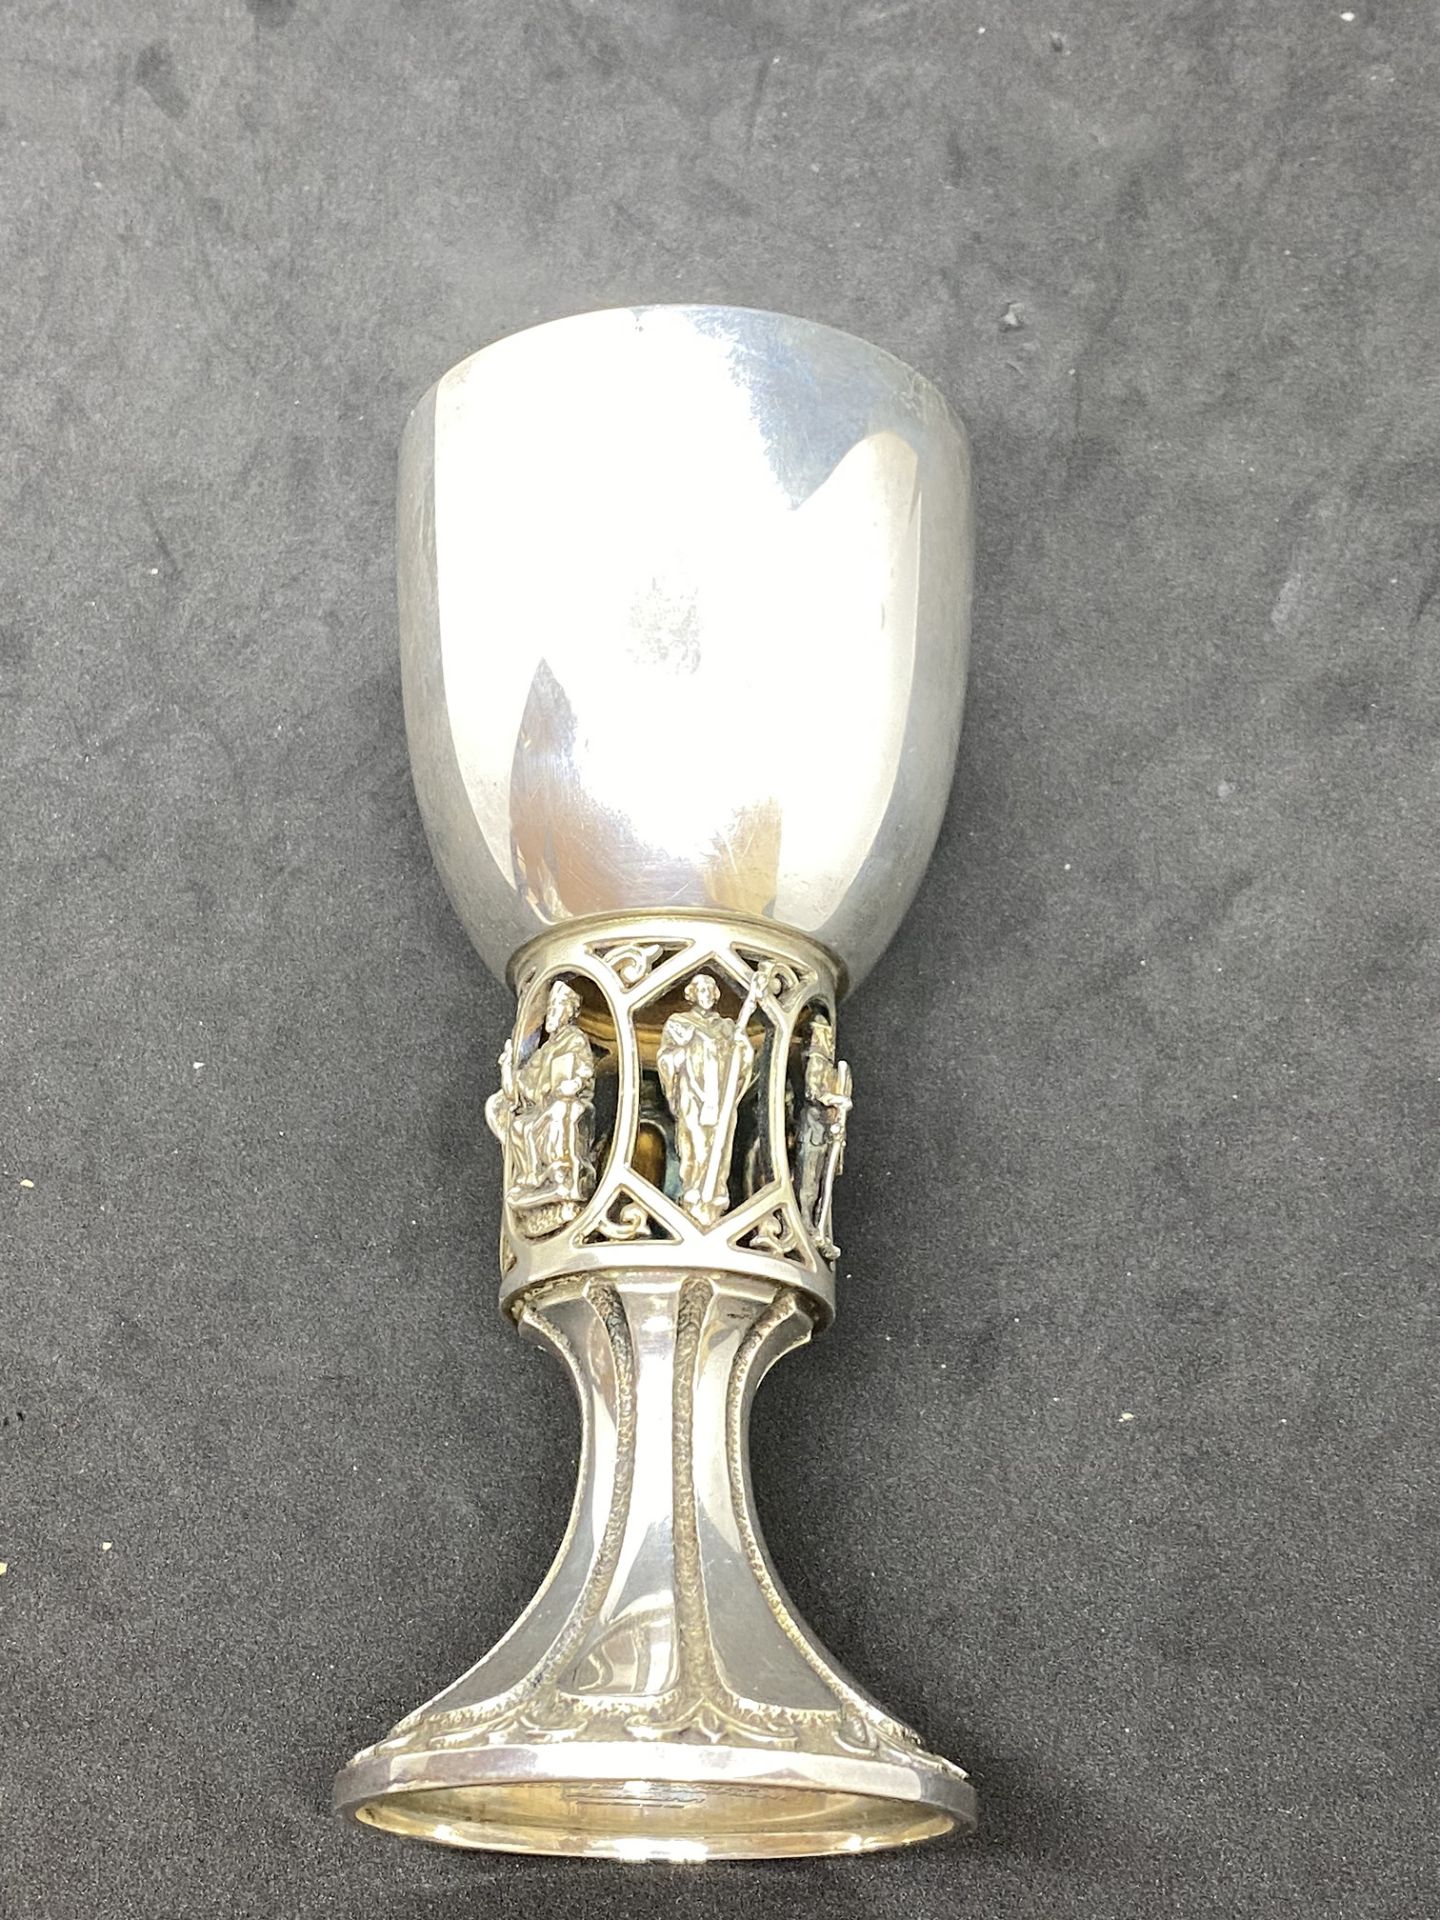 333gram LTD EDITION GOBLET NUMBER 56 OF 500 - ORDER OF DEAN & CHAPTER OF CANTERBURY